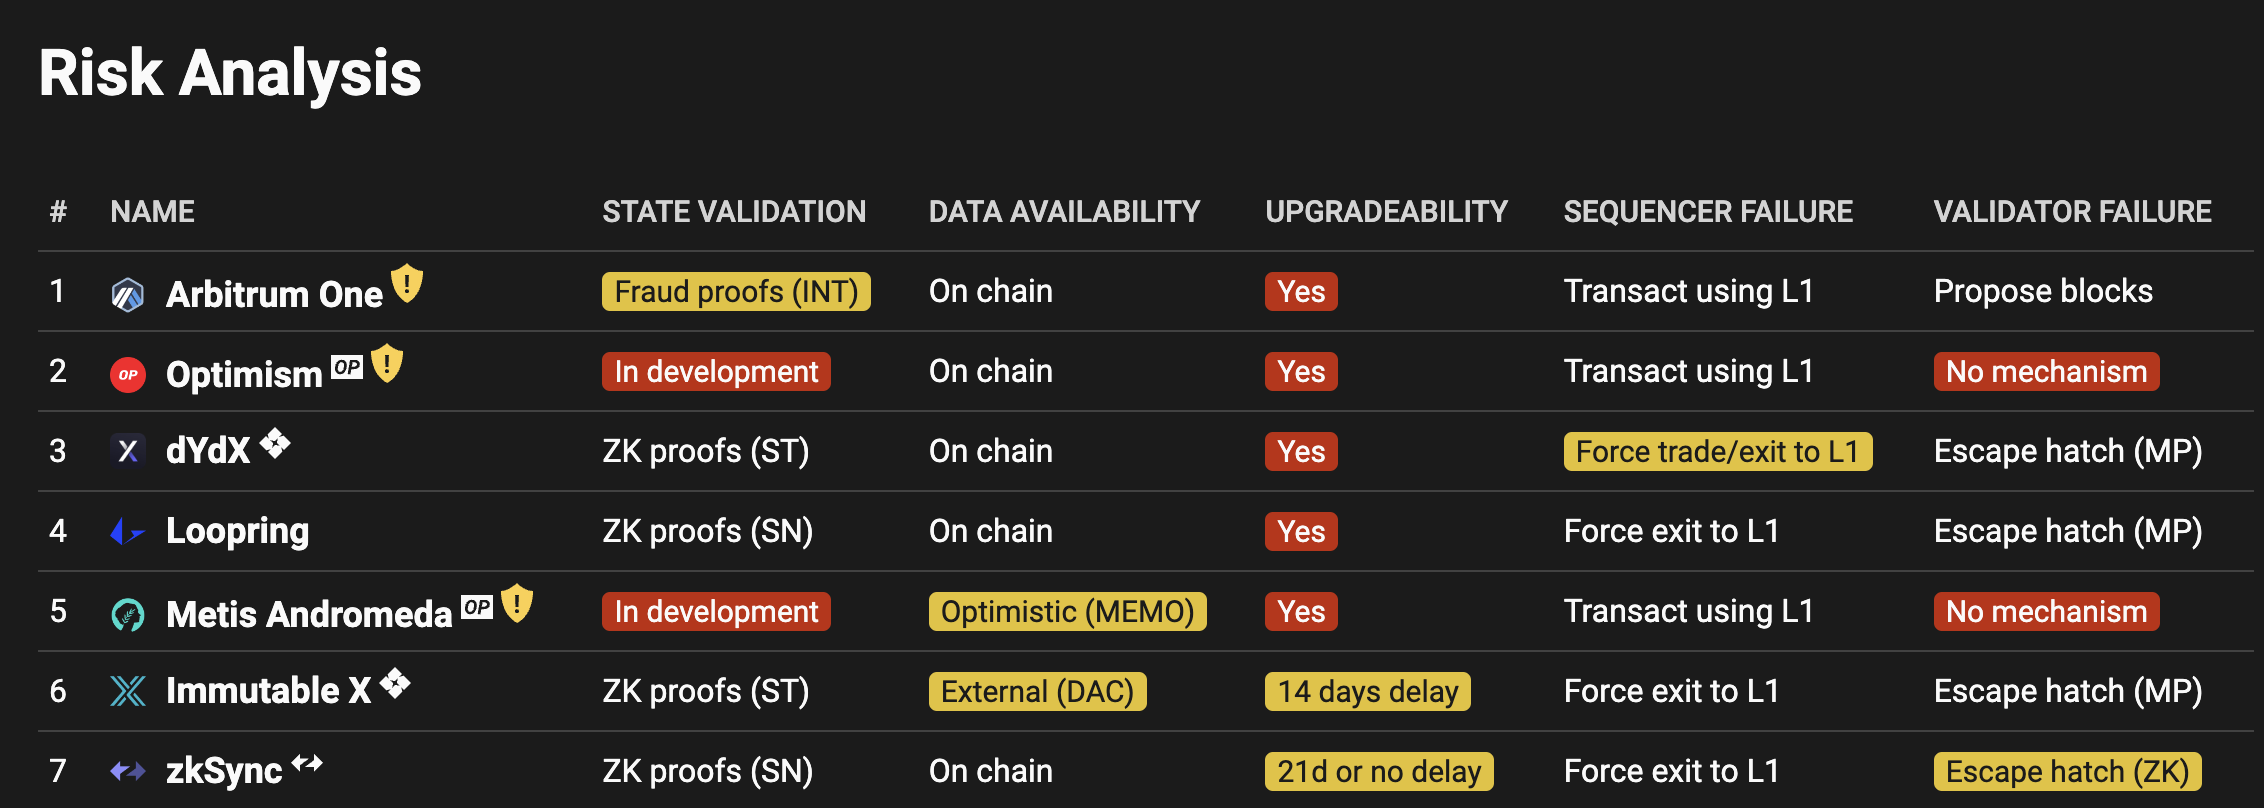 Source: L2beat.com. Displays different risks of rollups. For the topics we are discussing, a rollup with decentralized proposers and provers would have "Propose Blocks" in the Sequencer and Validator Failure columns (and it would be highly accessible for users to operate such). As you see, none of the above currently satisfies both. 